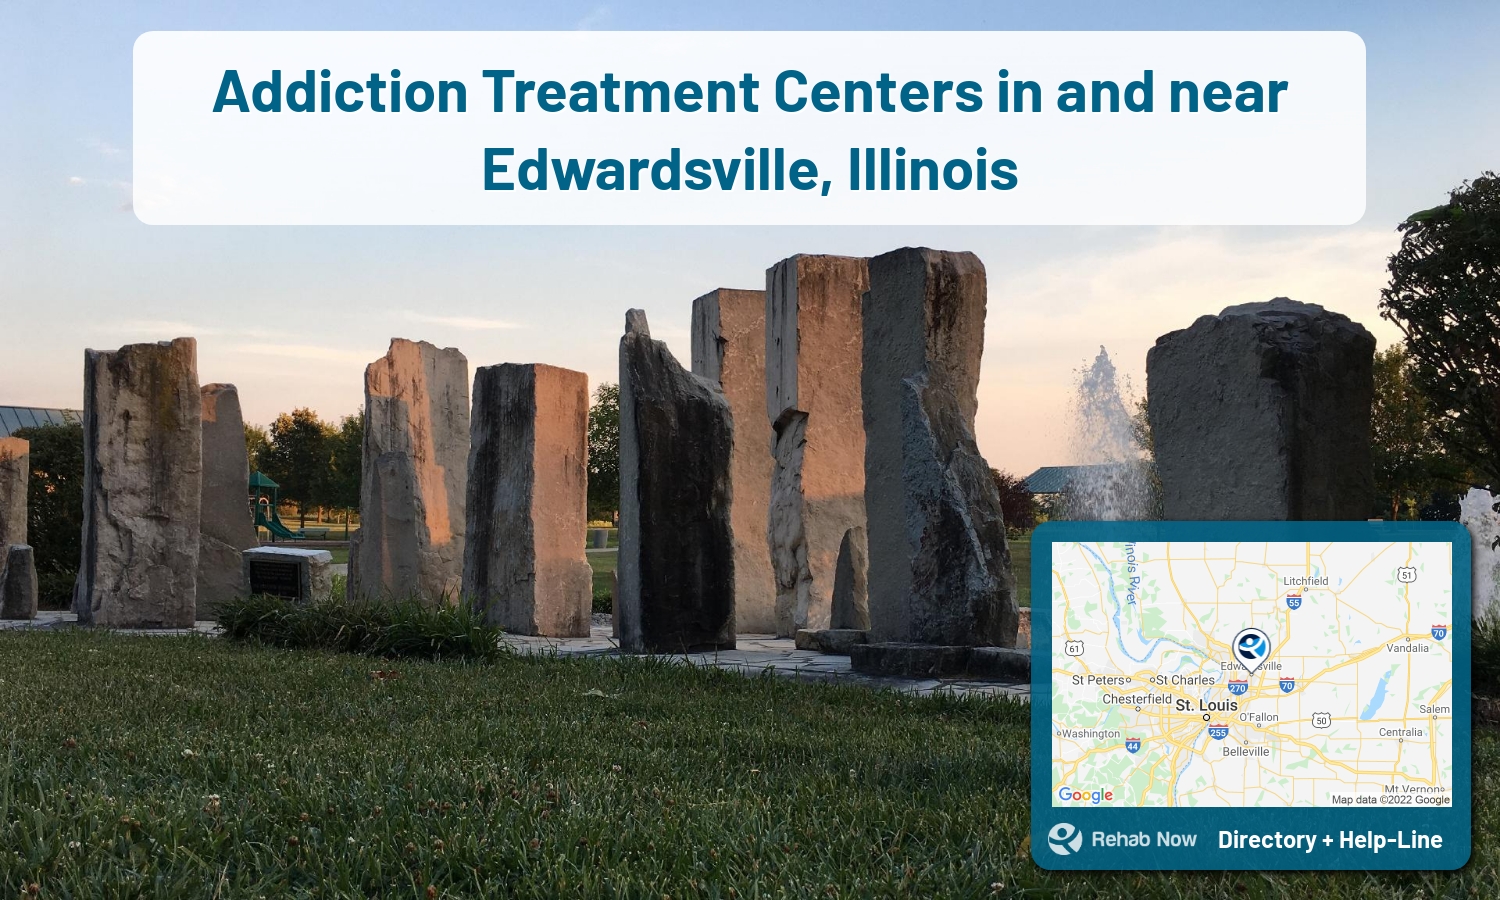 View options, availability, treatment methods, and more, for drug rehab and alcohol treatment in Edwardsville, Illinois